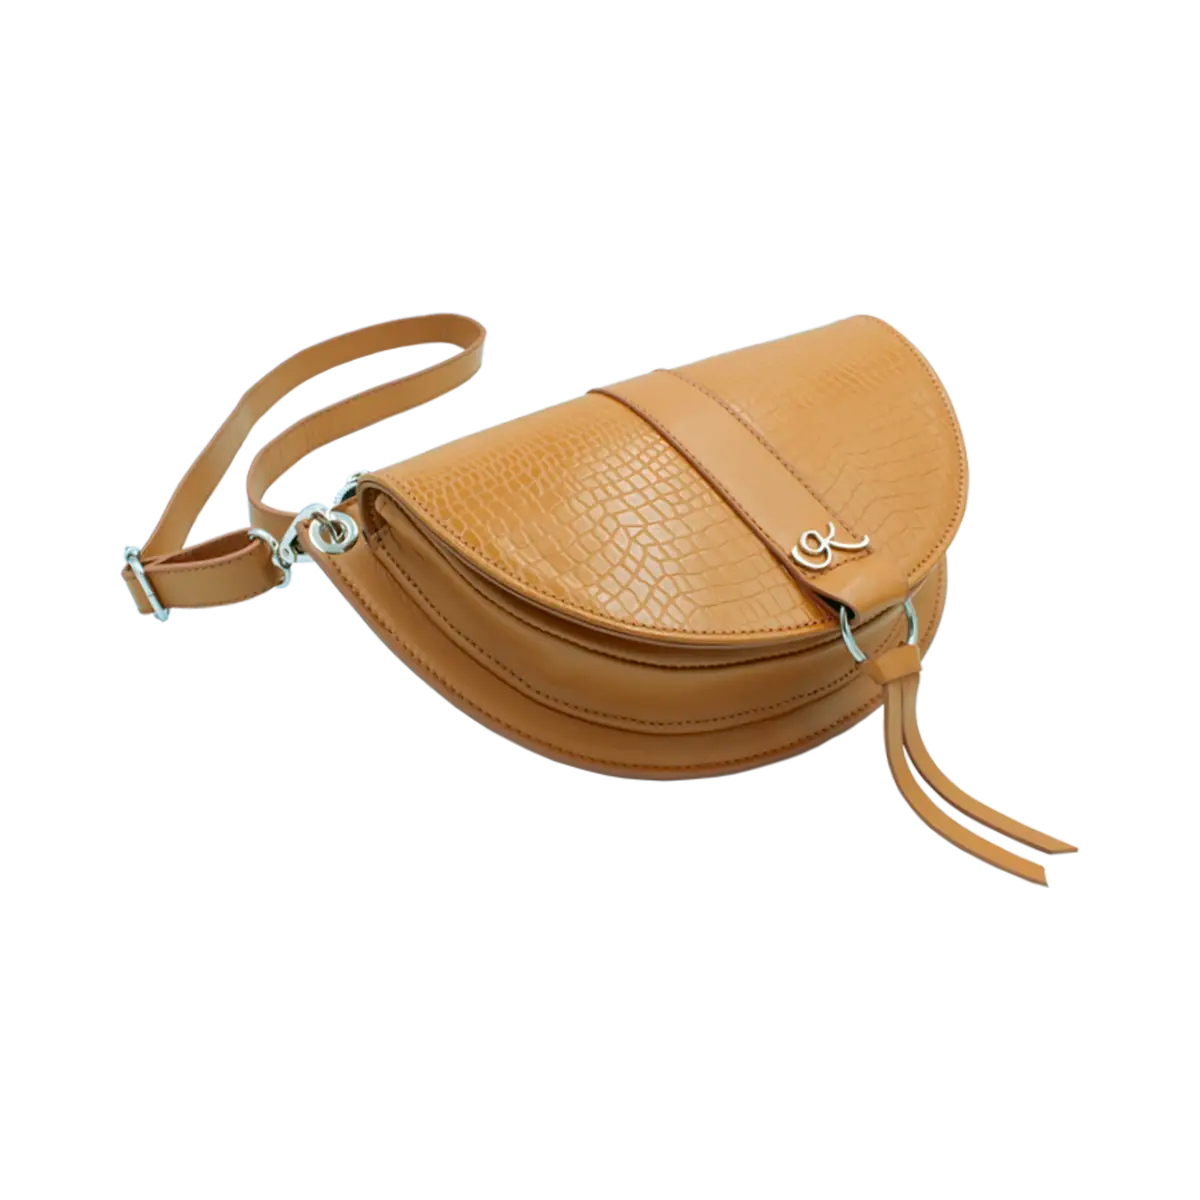 tan print leather crossbody bag and fanny pack. Accessory for women in San Diego, CA.